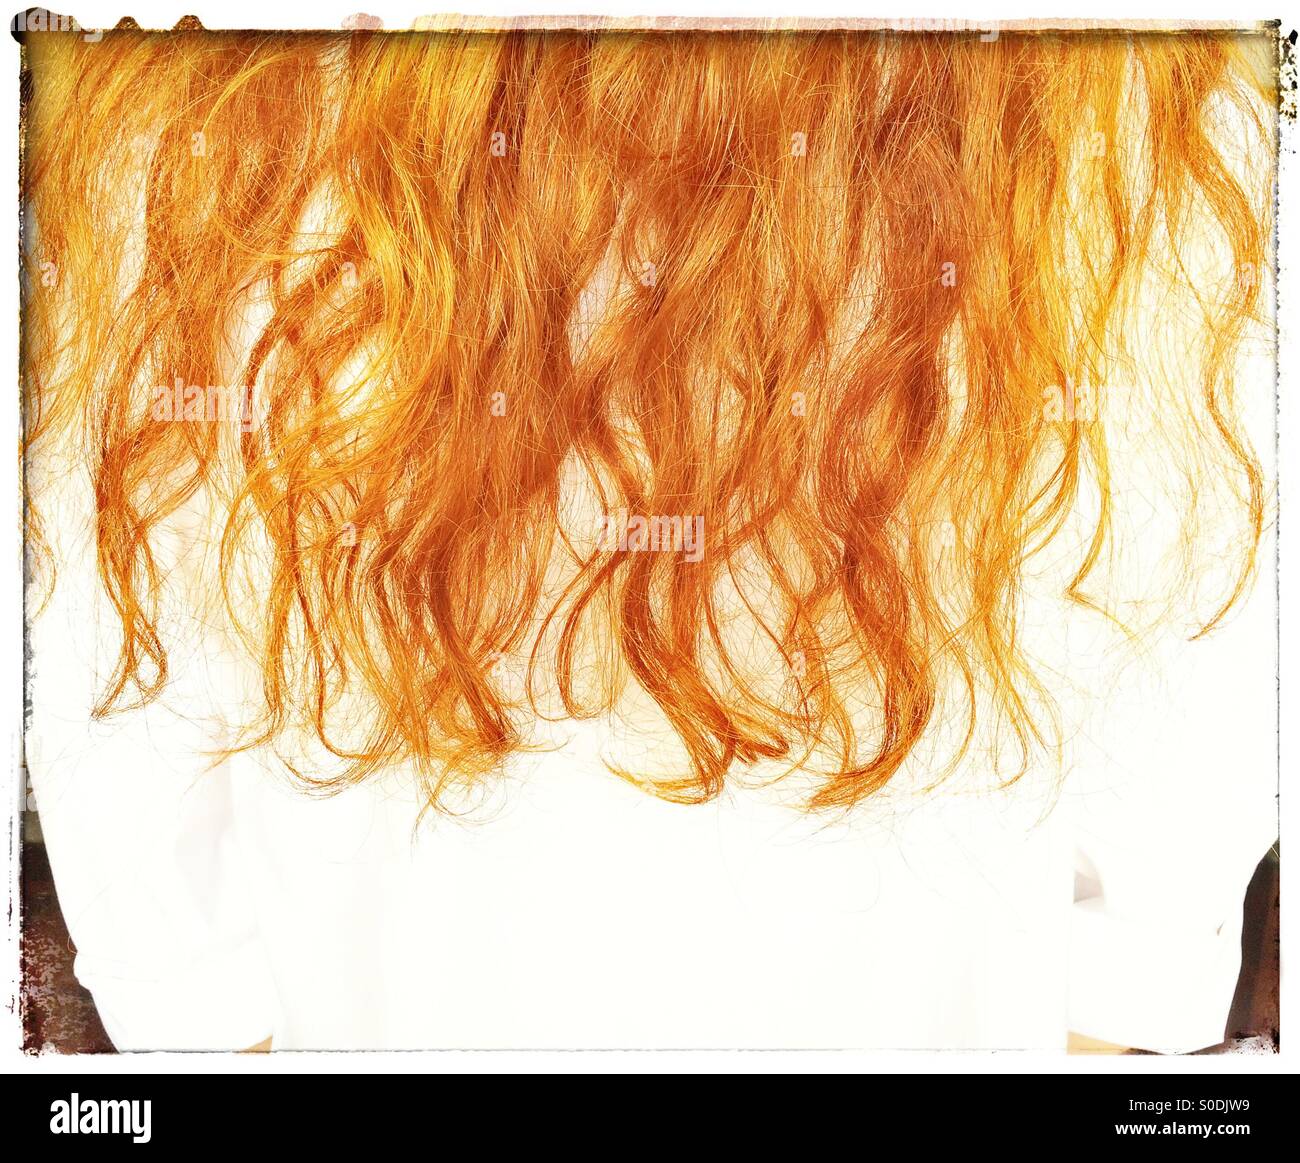 Long red hair. Stock Photo